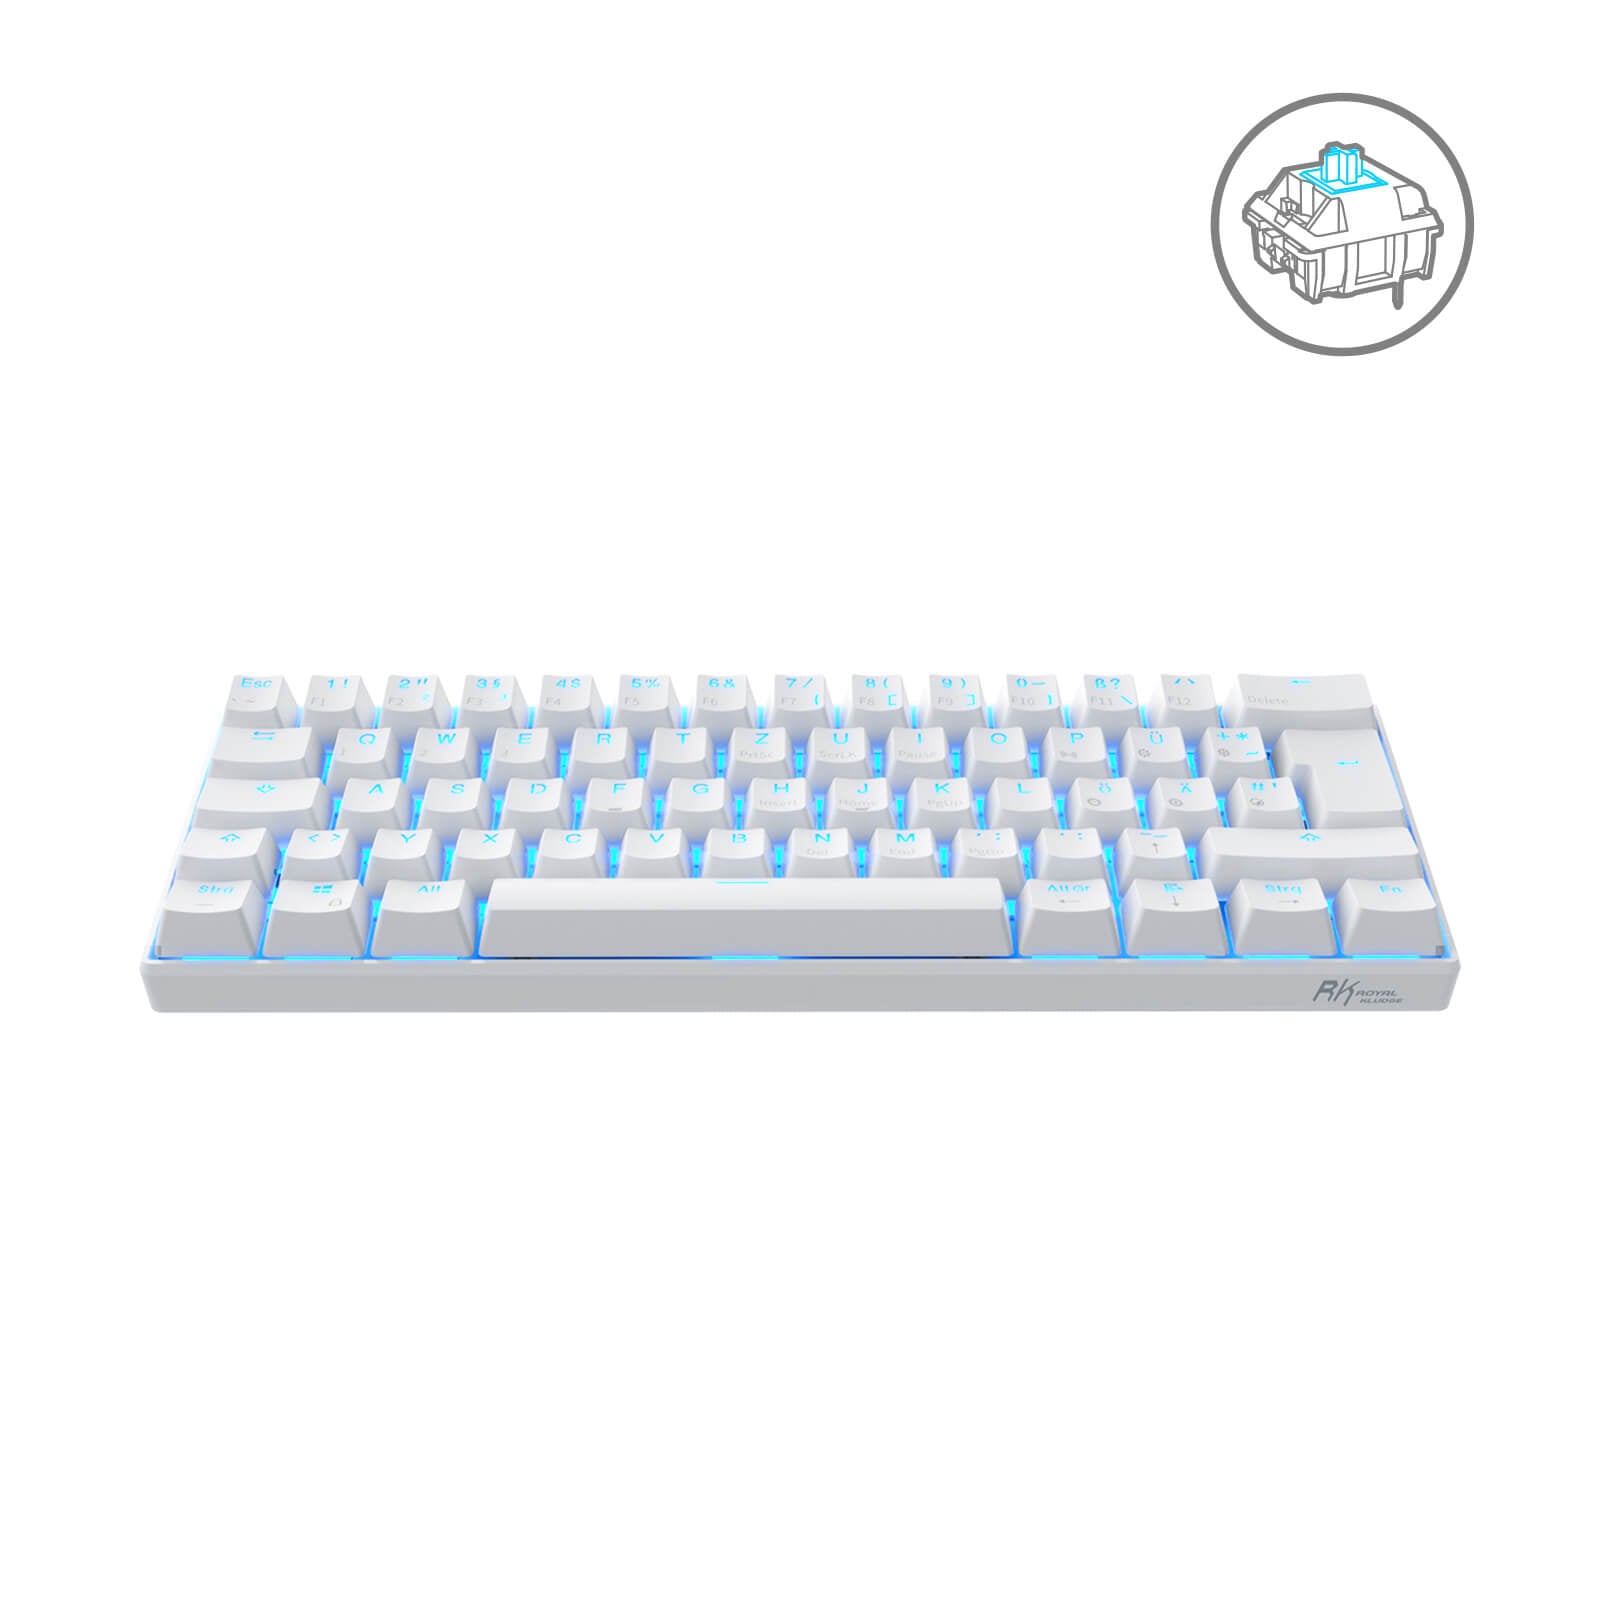  RK ROYAL KLUDGE RK61 Wireless 60% Mechanical Gaming Keyboard,  Ultra-Compact 60 Keys Bluetooth Mechanical Keyboard with Programmable  Software (Blue Switch, White) : Video Games